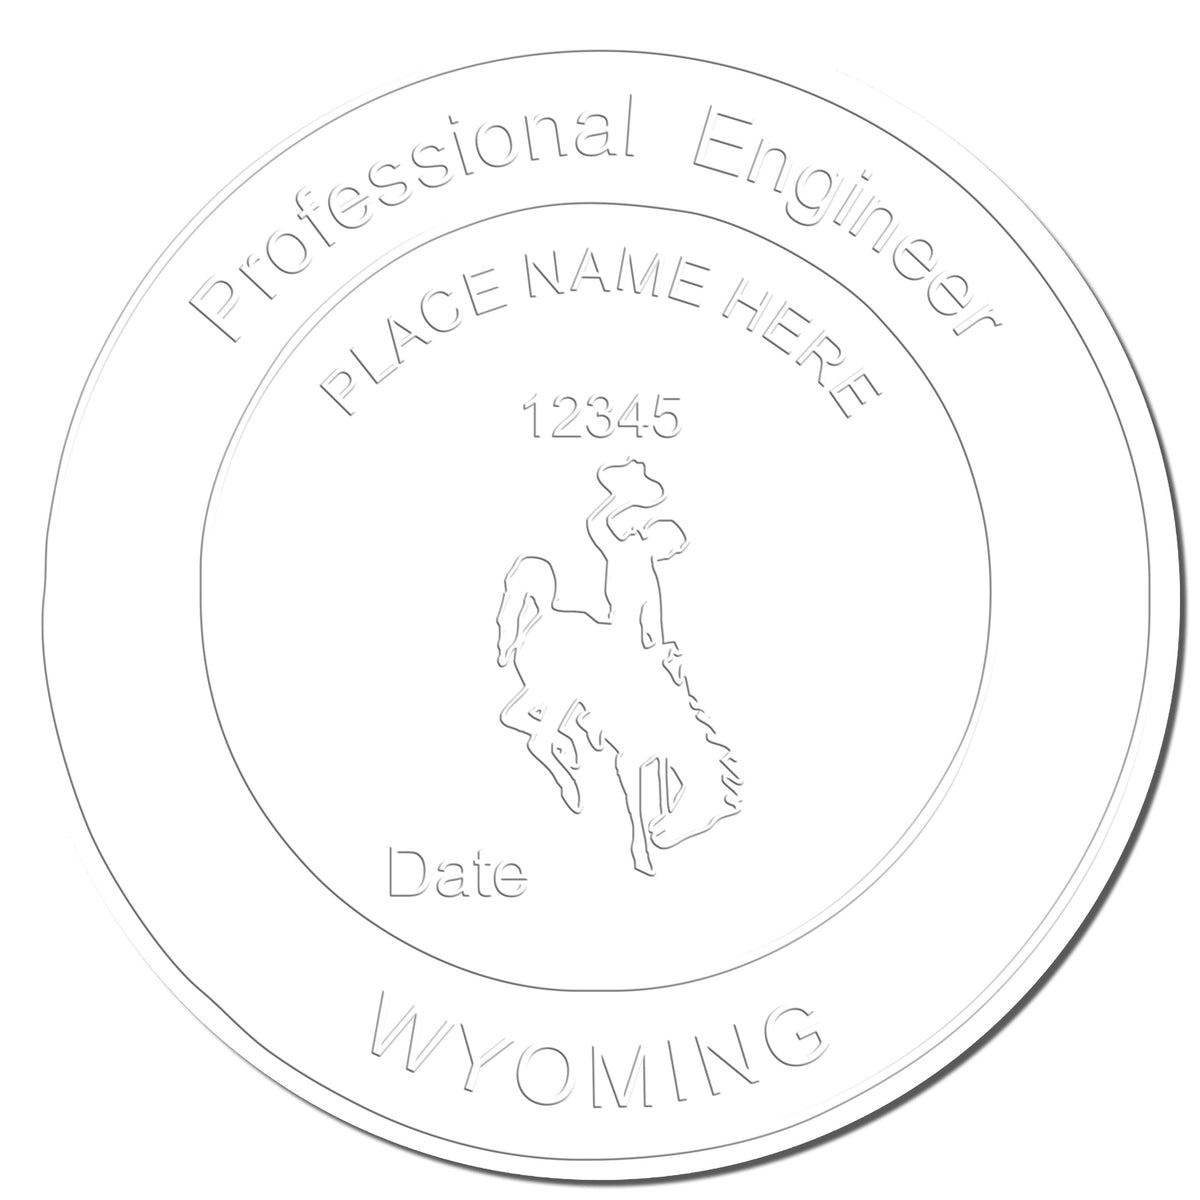 This paper is stamped with a sample imprint of the State of Wyoming Extended Long Reach Engineer Seal, signifying its quality and reliability.